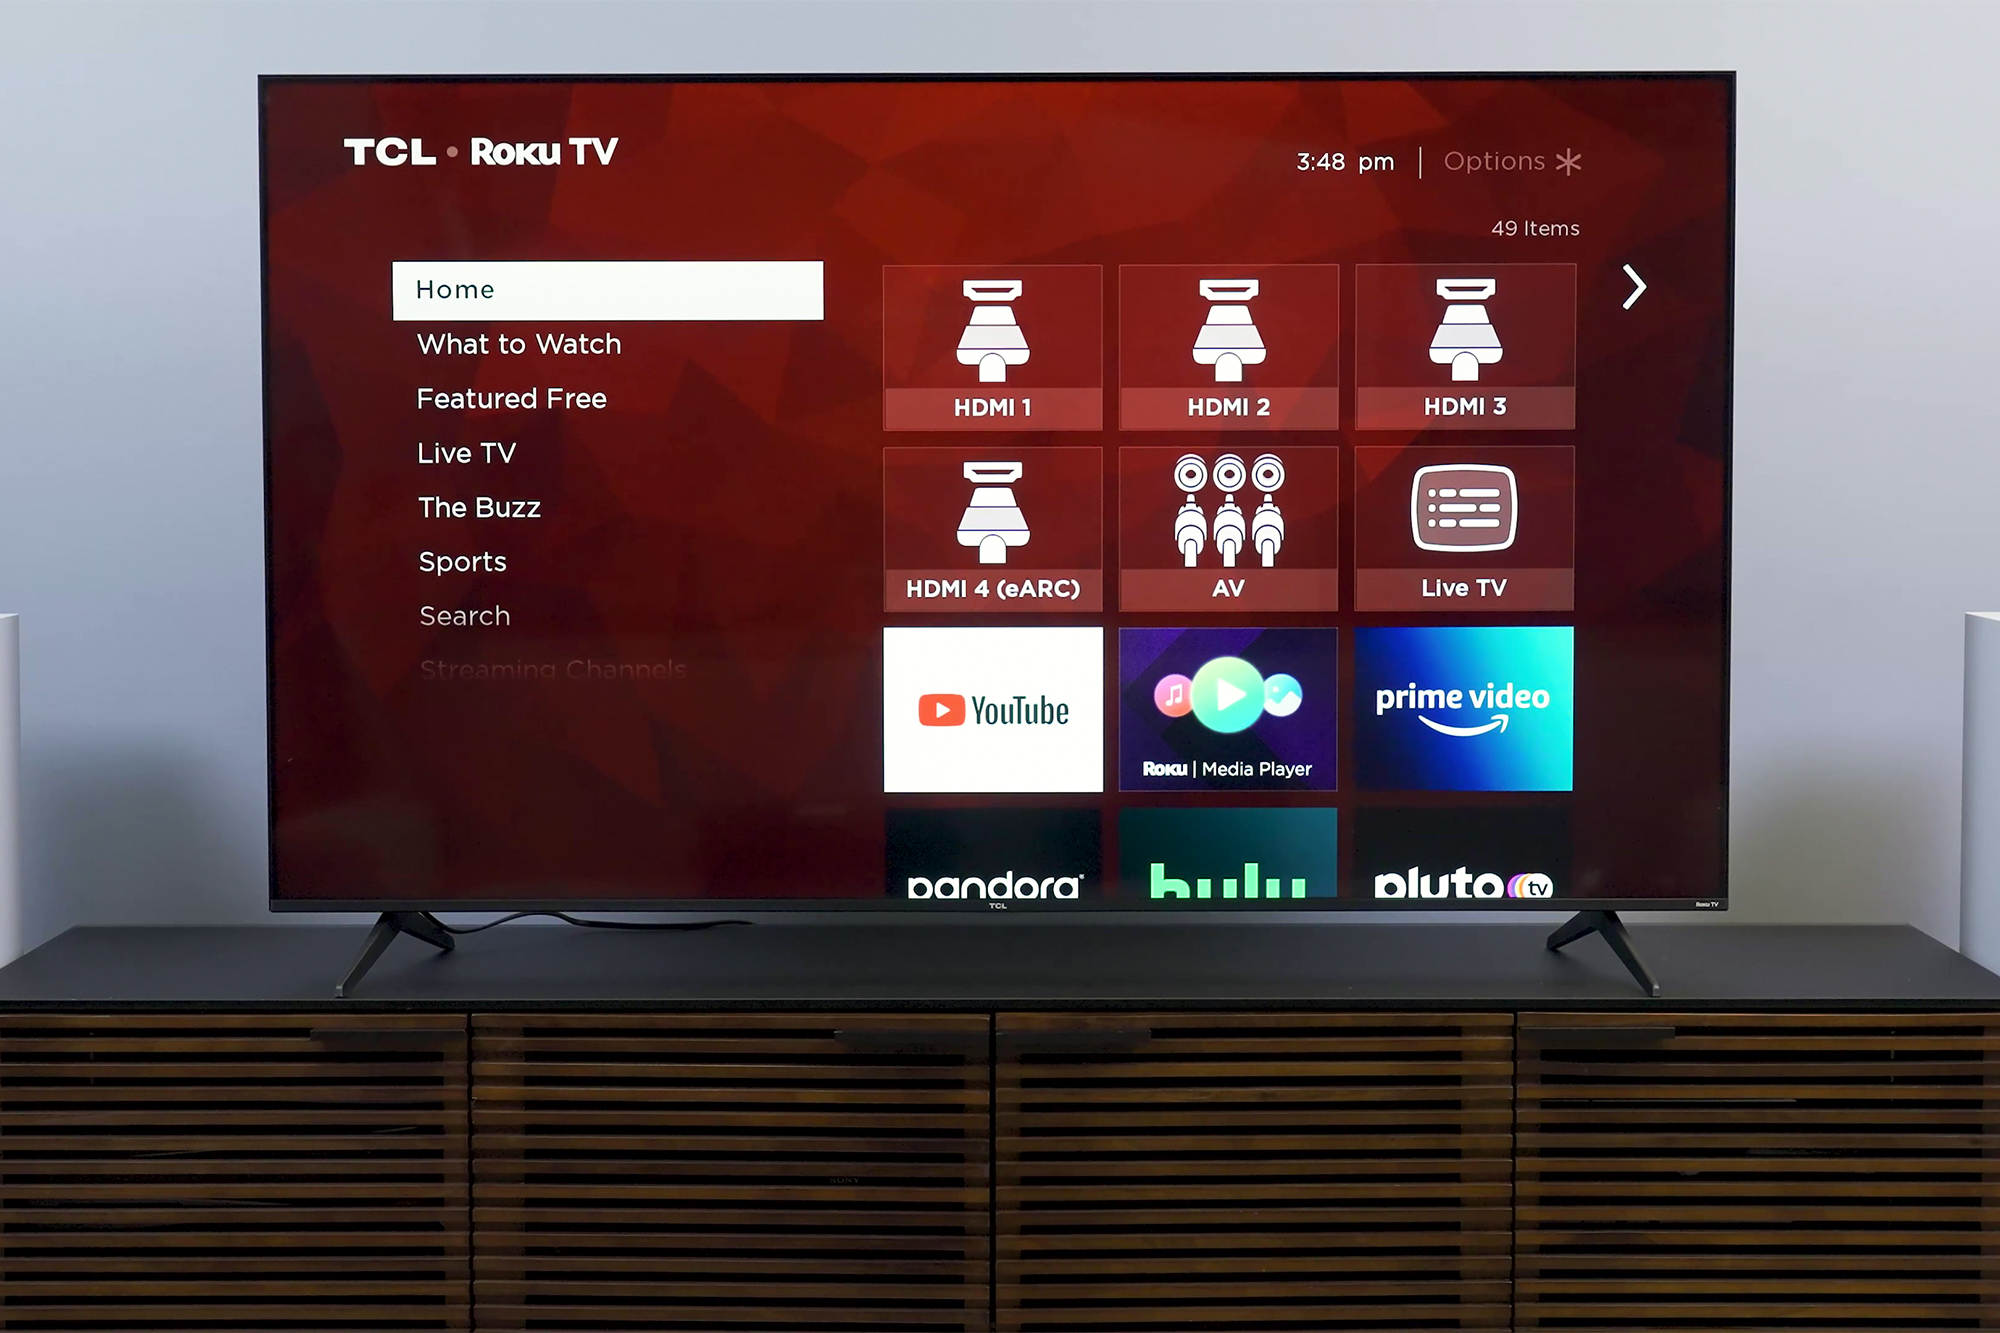 The Roku home screen on the TCL-5 Series (S555).